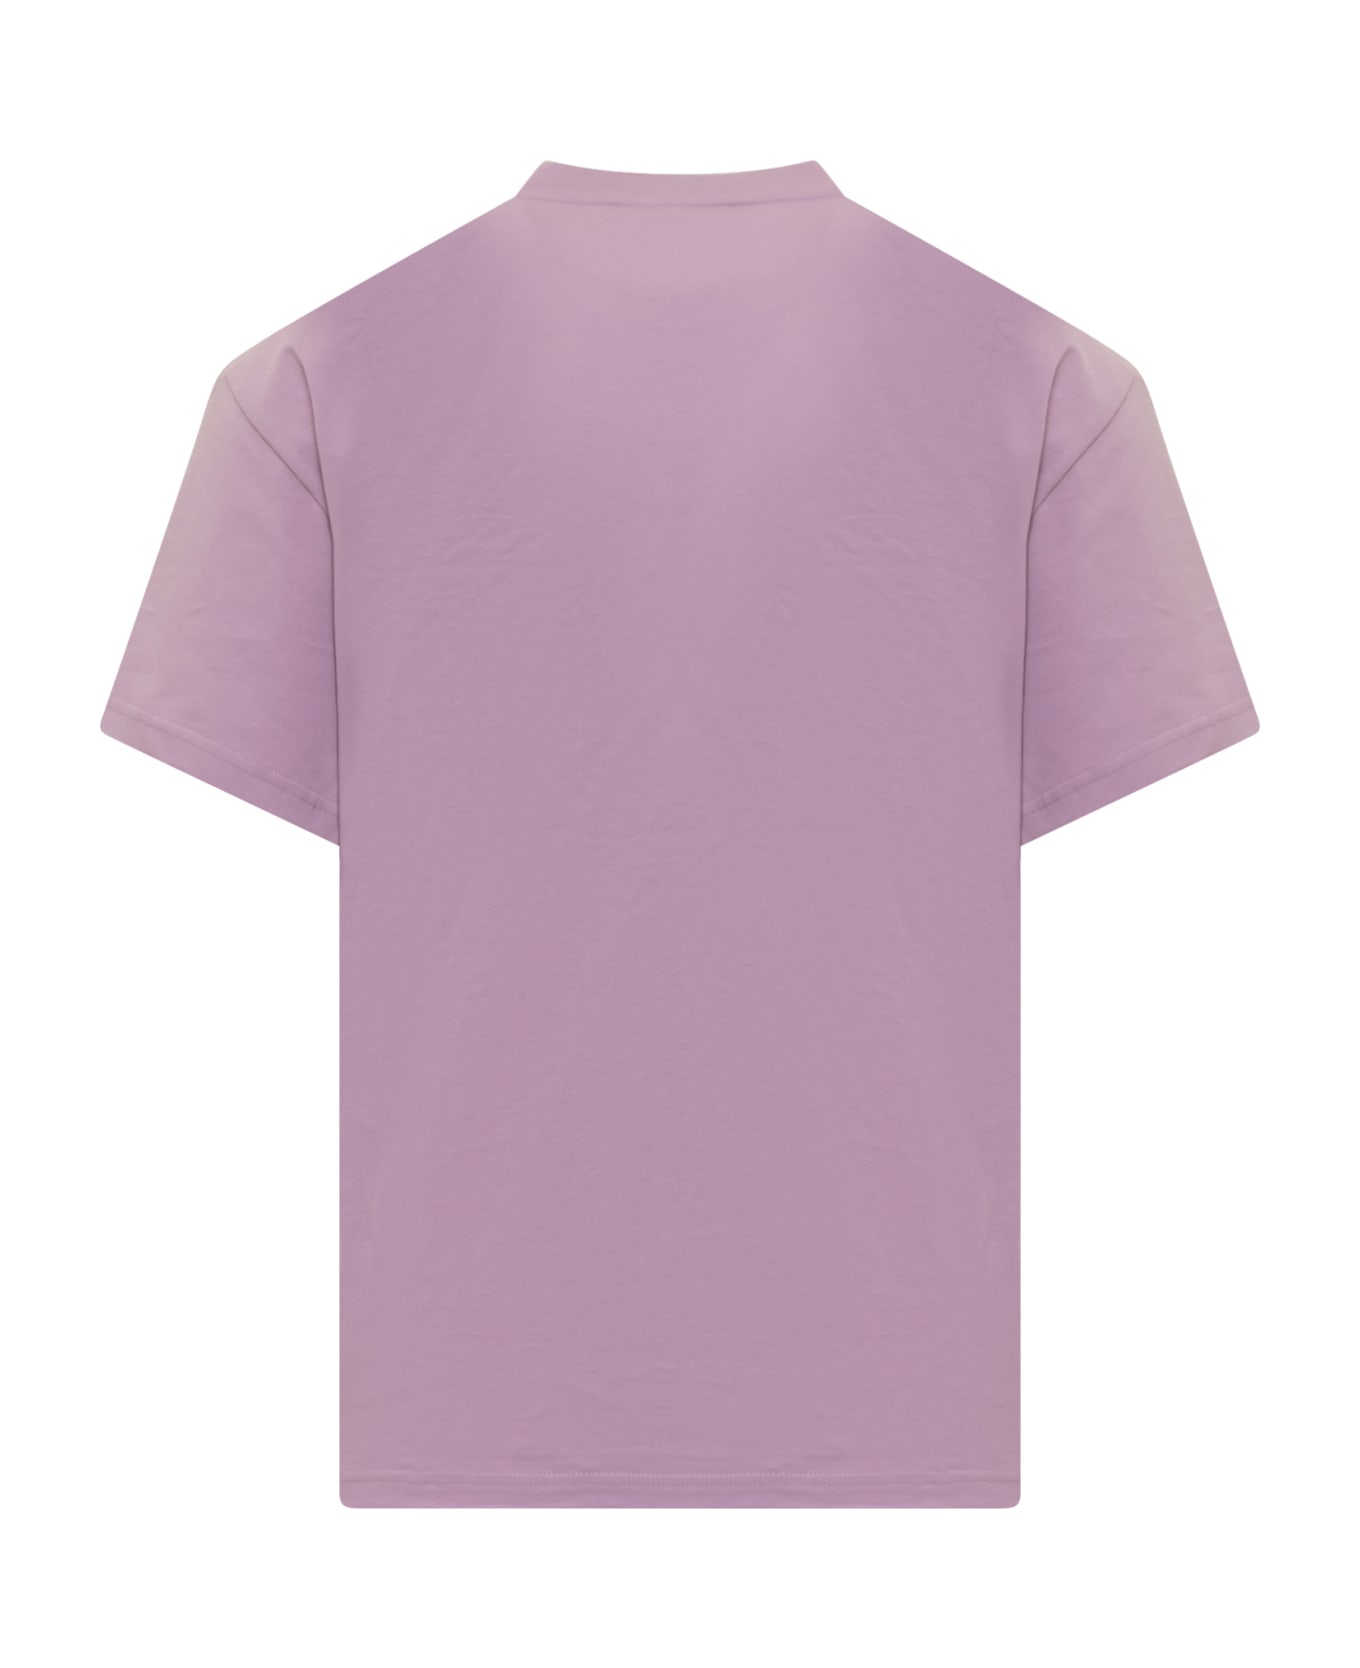 J.W. Anderson Anchor T-shirt - PINK